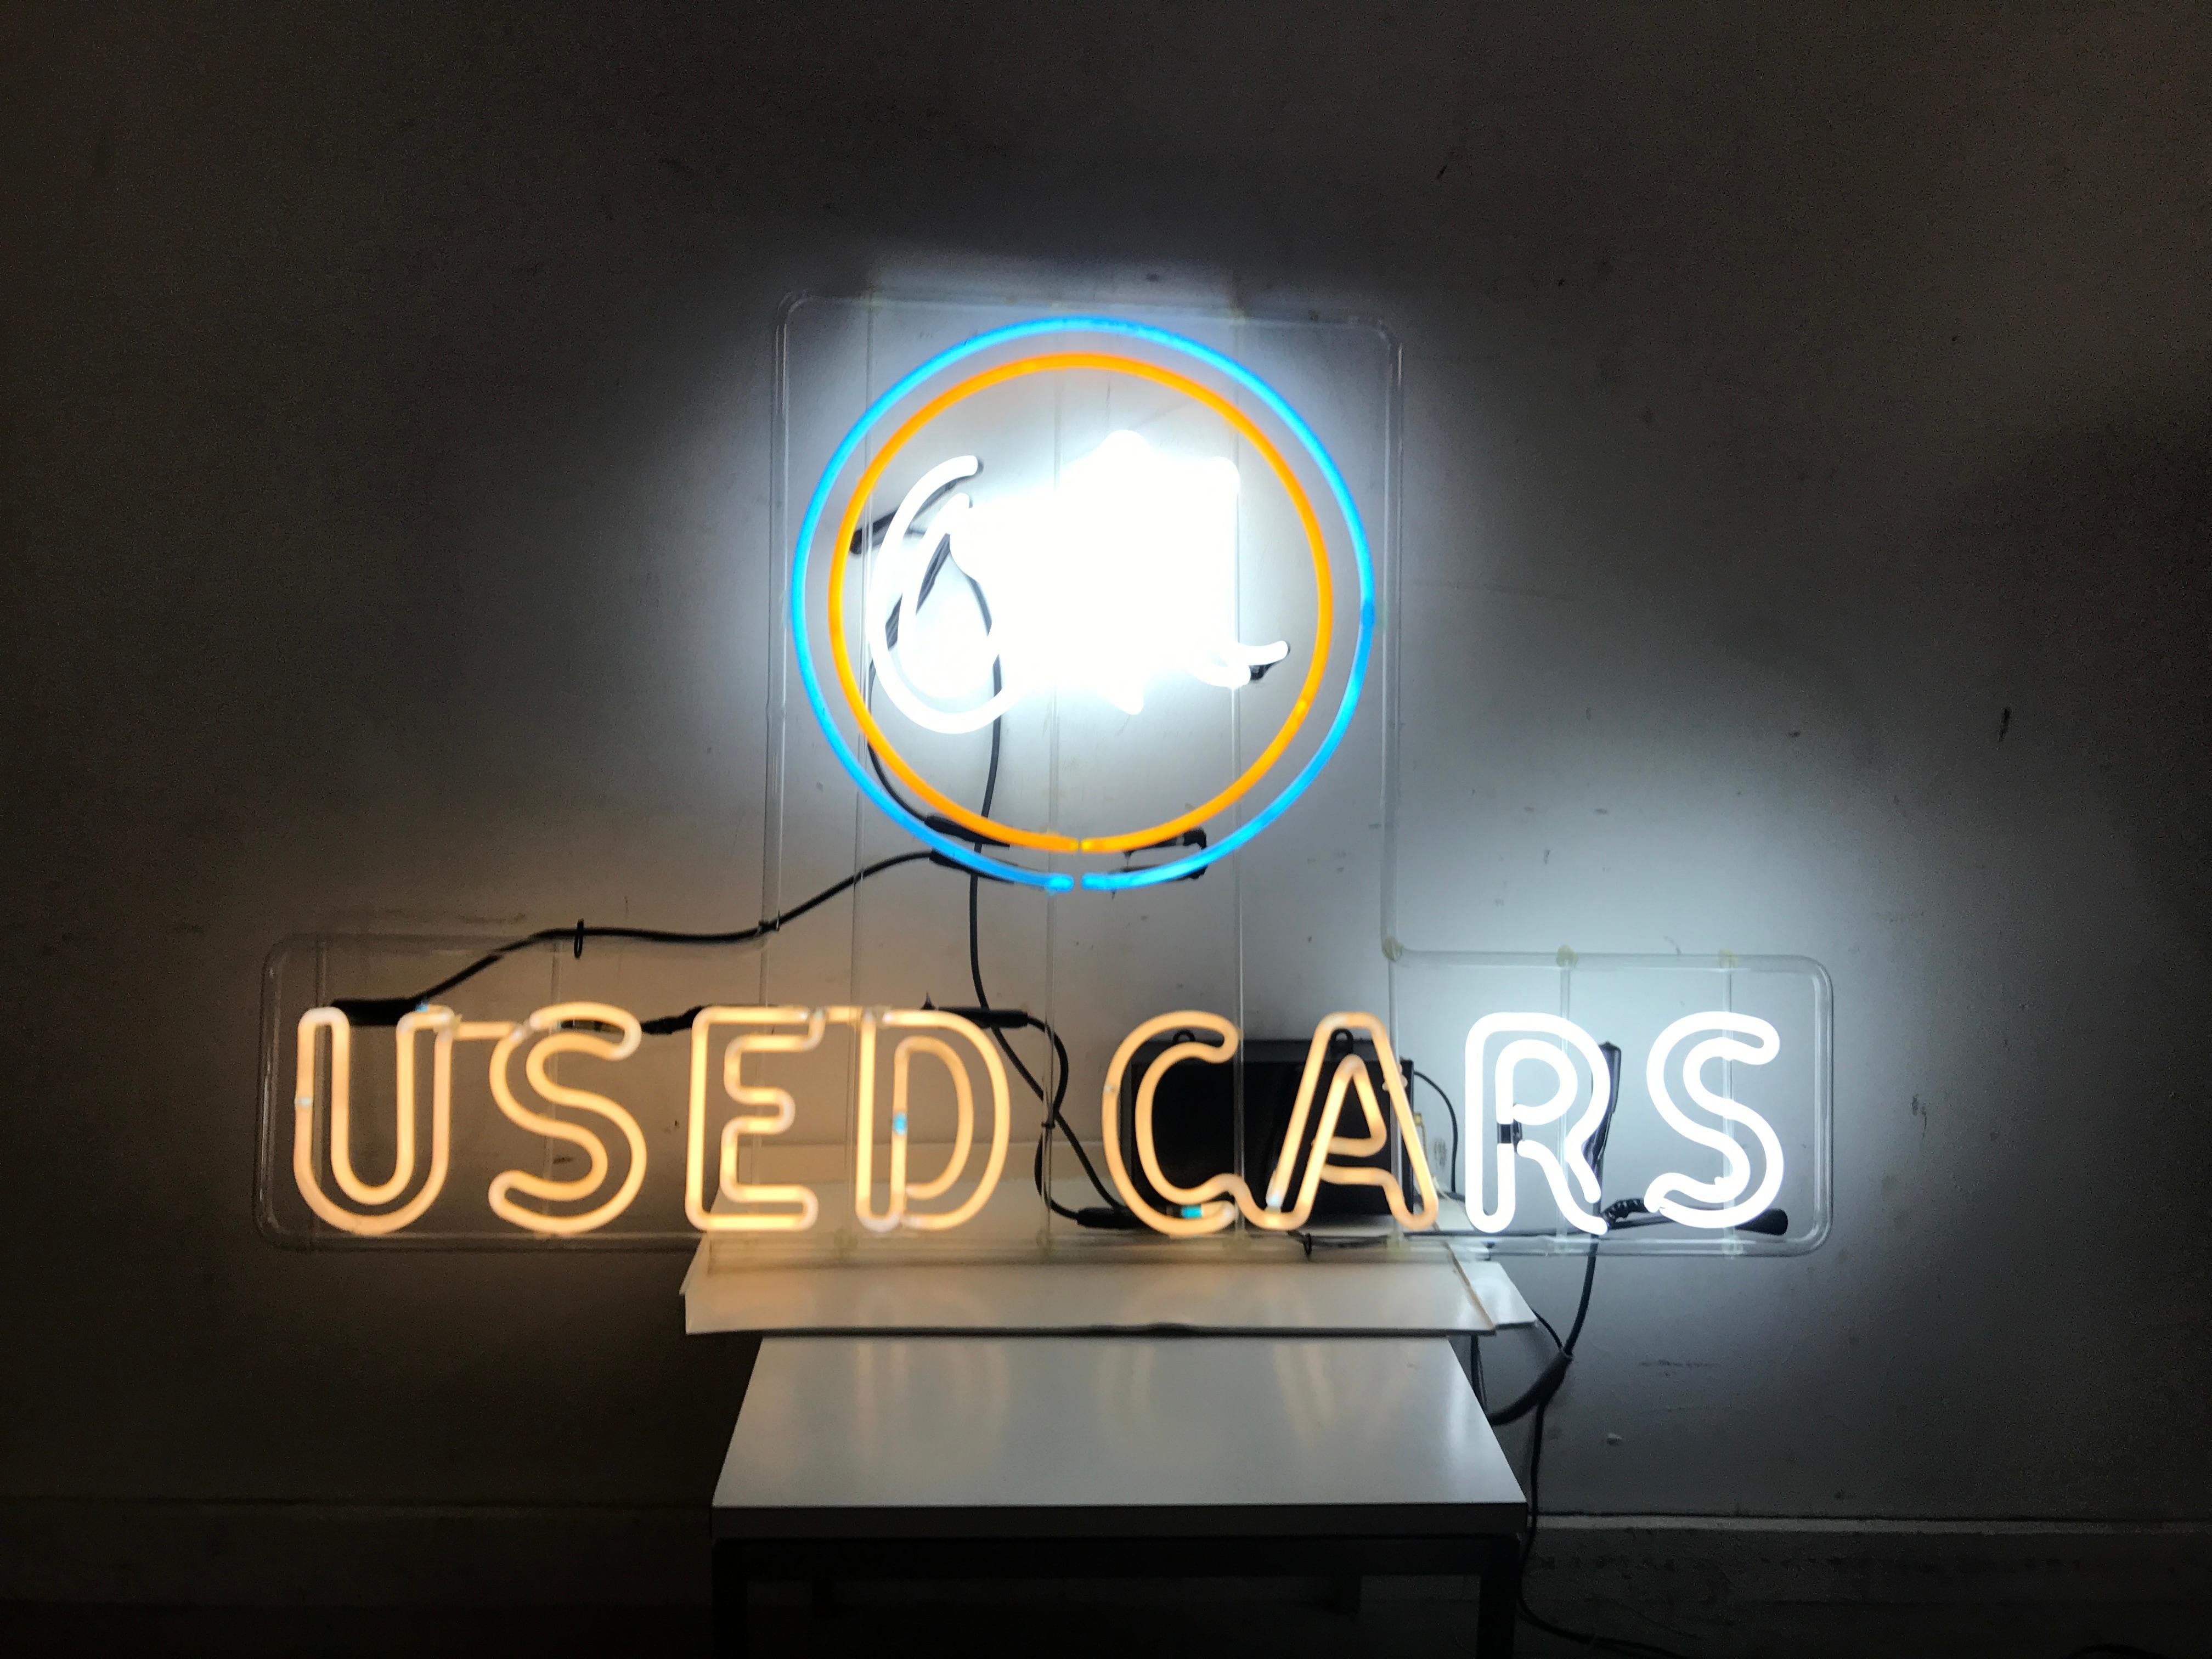 Original, large ok used cars neon sign, circa 1940s. Appears that the R and S have been repaired at some point, other then that all original neon, letters measure 8 inches high, OK 19 inches in diameter. Measures: 52